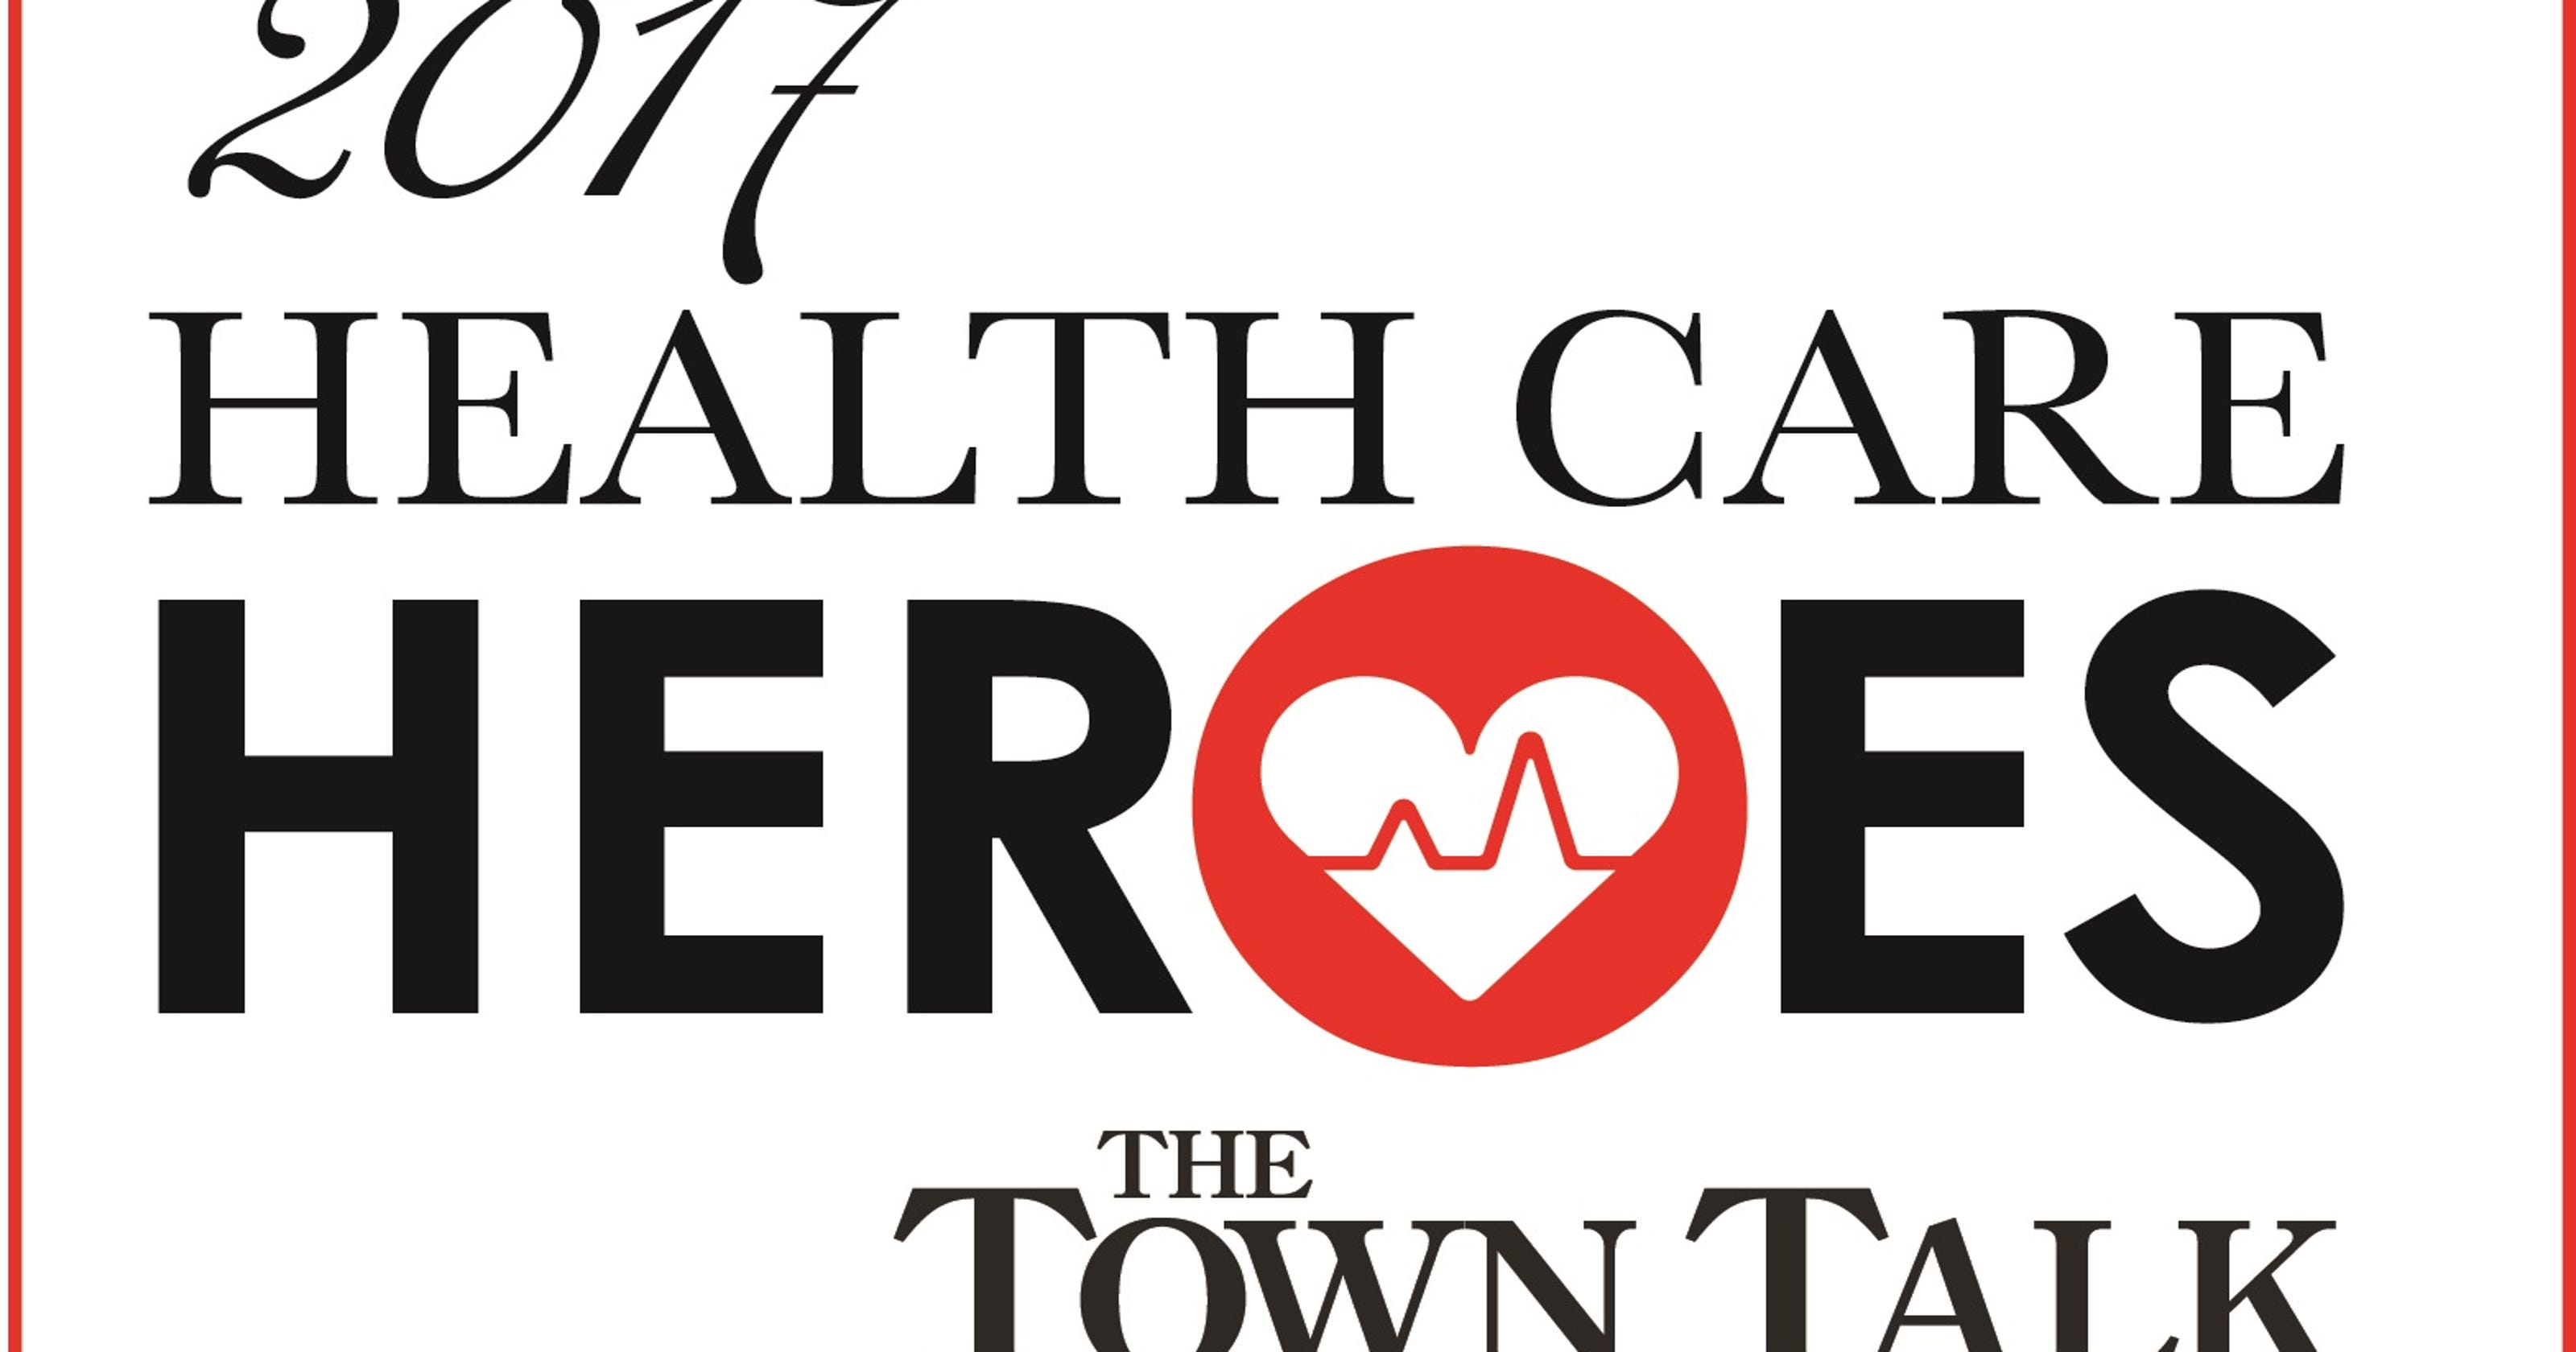 Health Care Heroes Awards event canceled due to anticipated storms Thursday